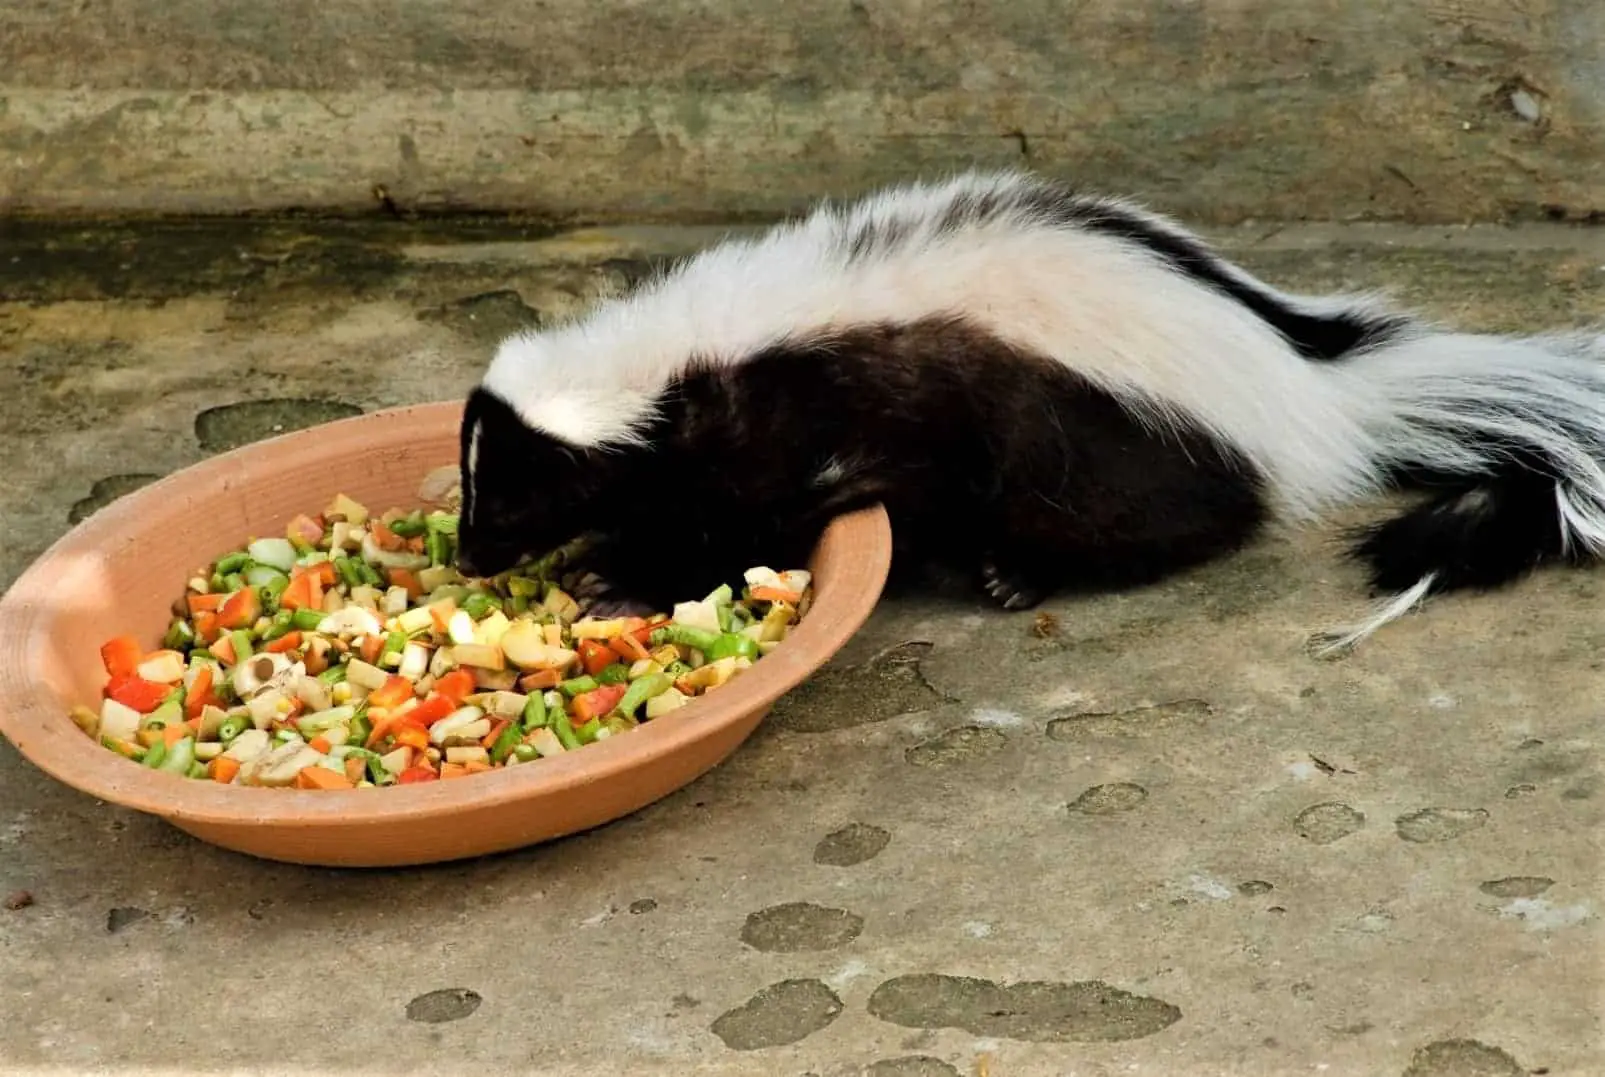 Do Skunks Really Eat Meat? How Much? (Actually!)